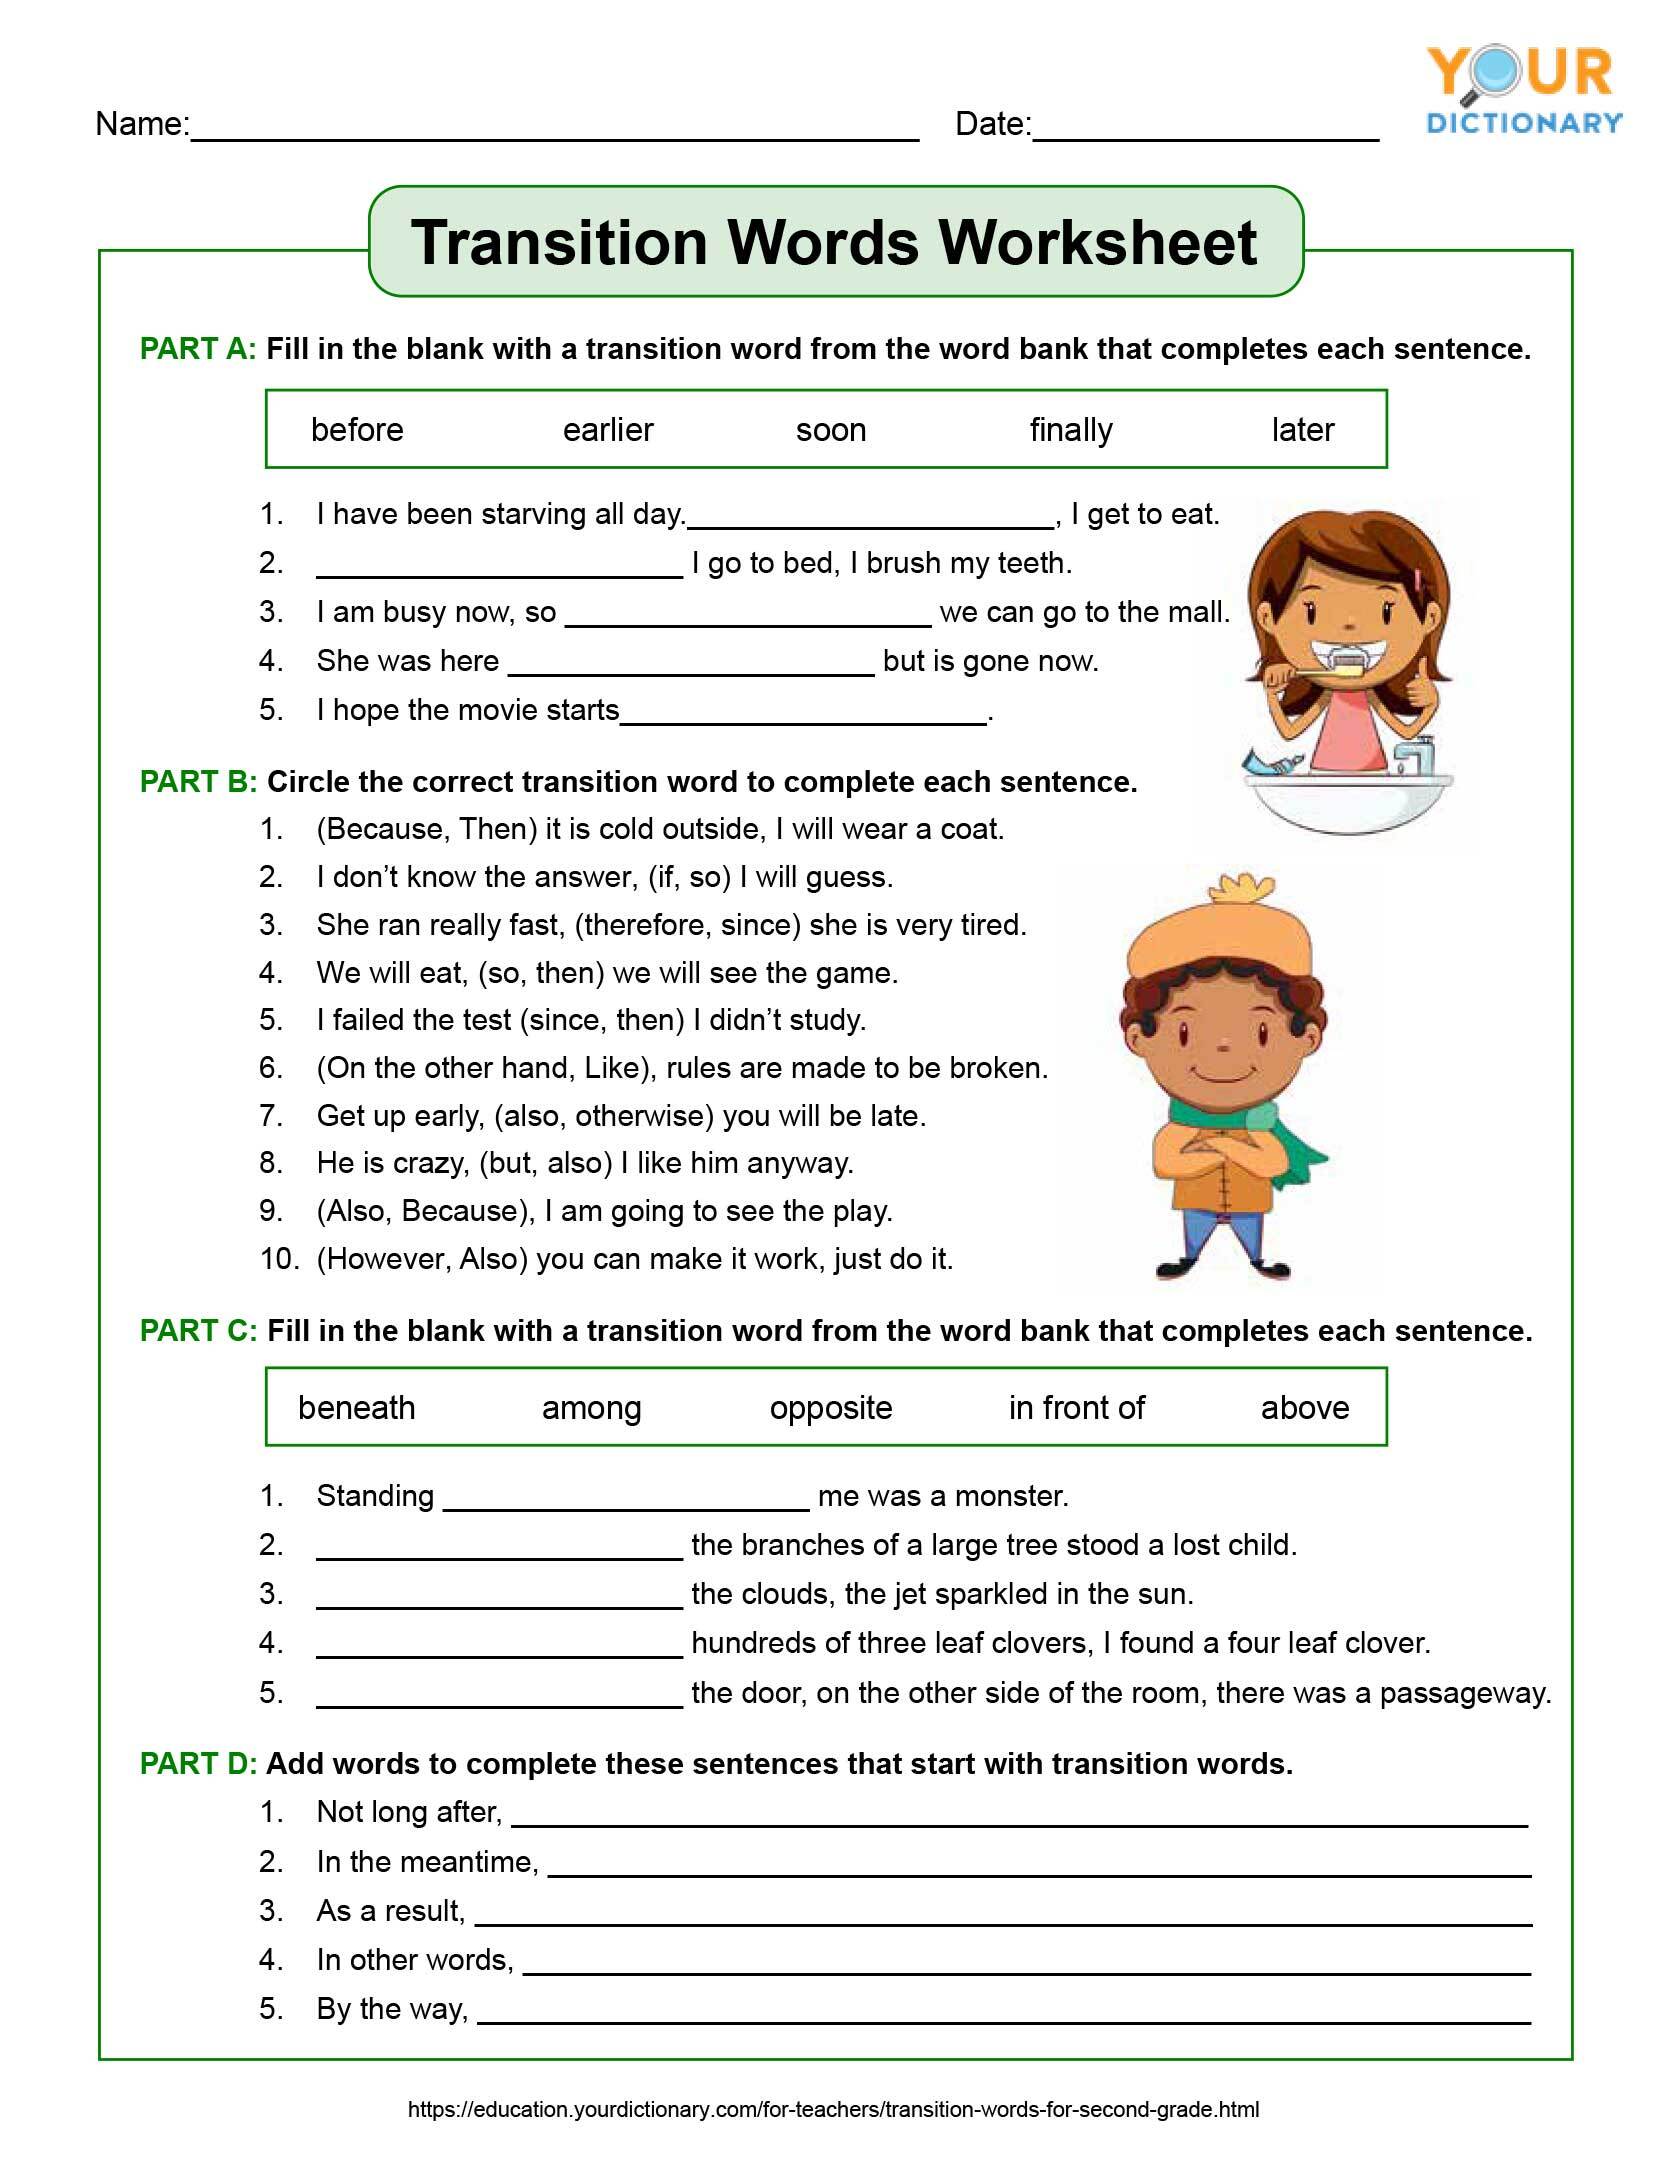 Using Transition Words Worksheets My XXX Hot Girl